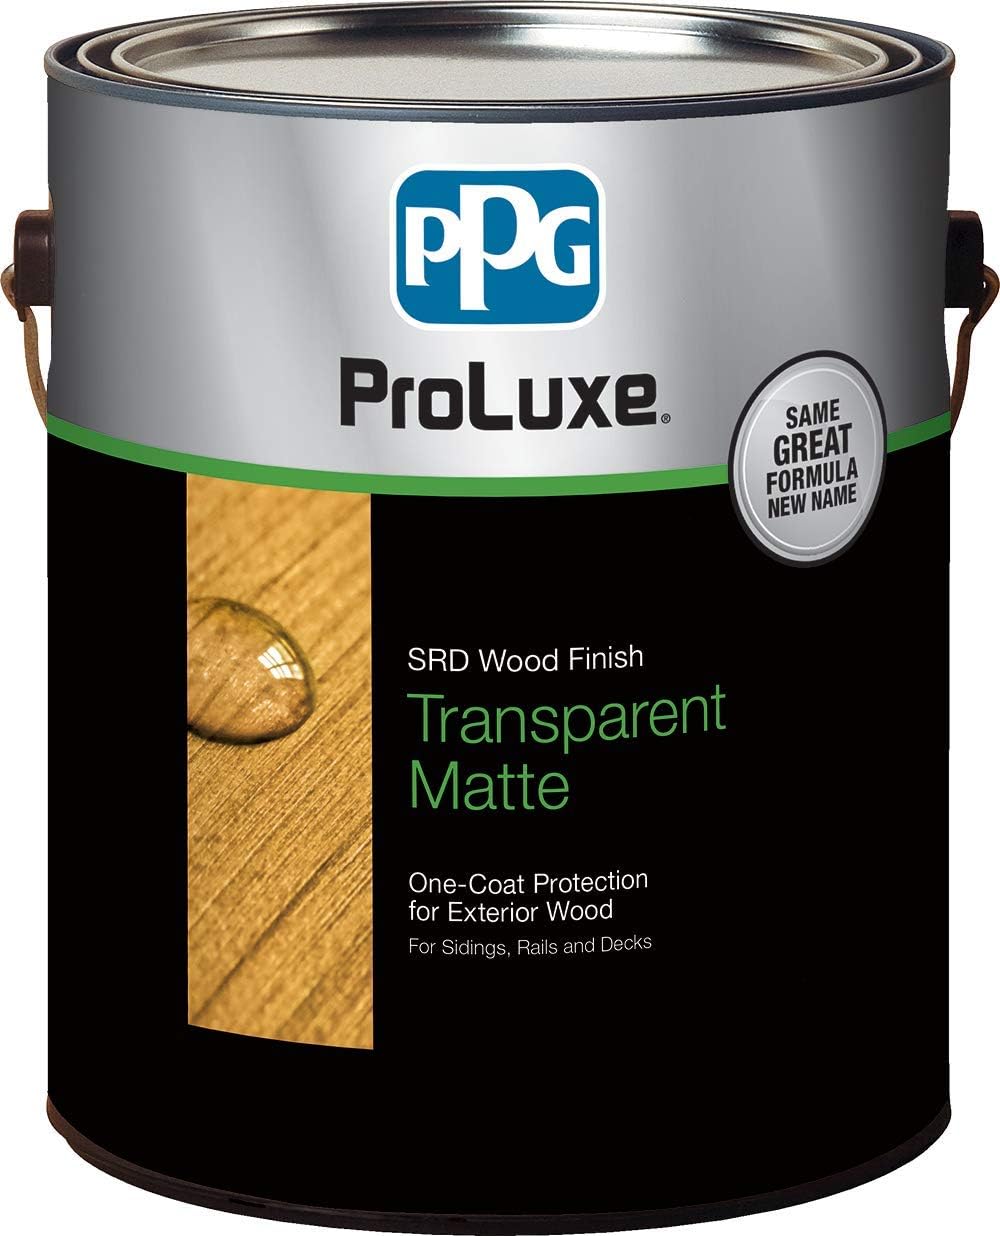 PPG ProLuxe Wood Finish